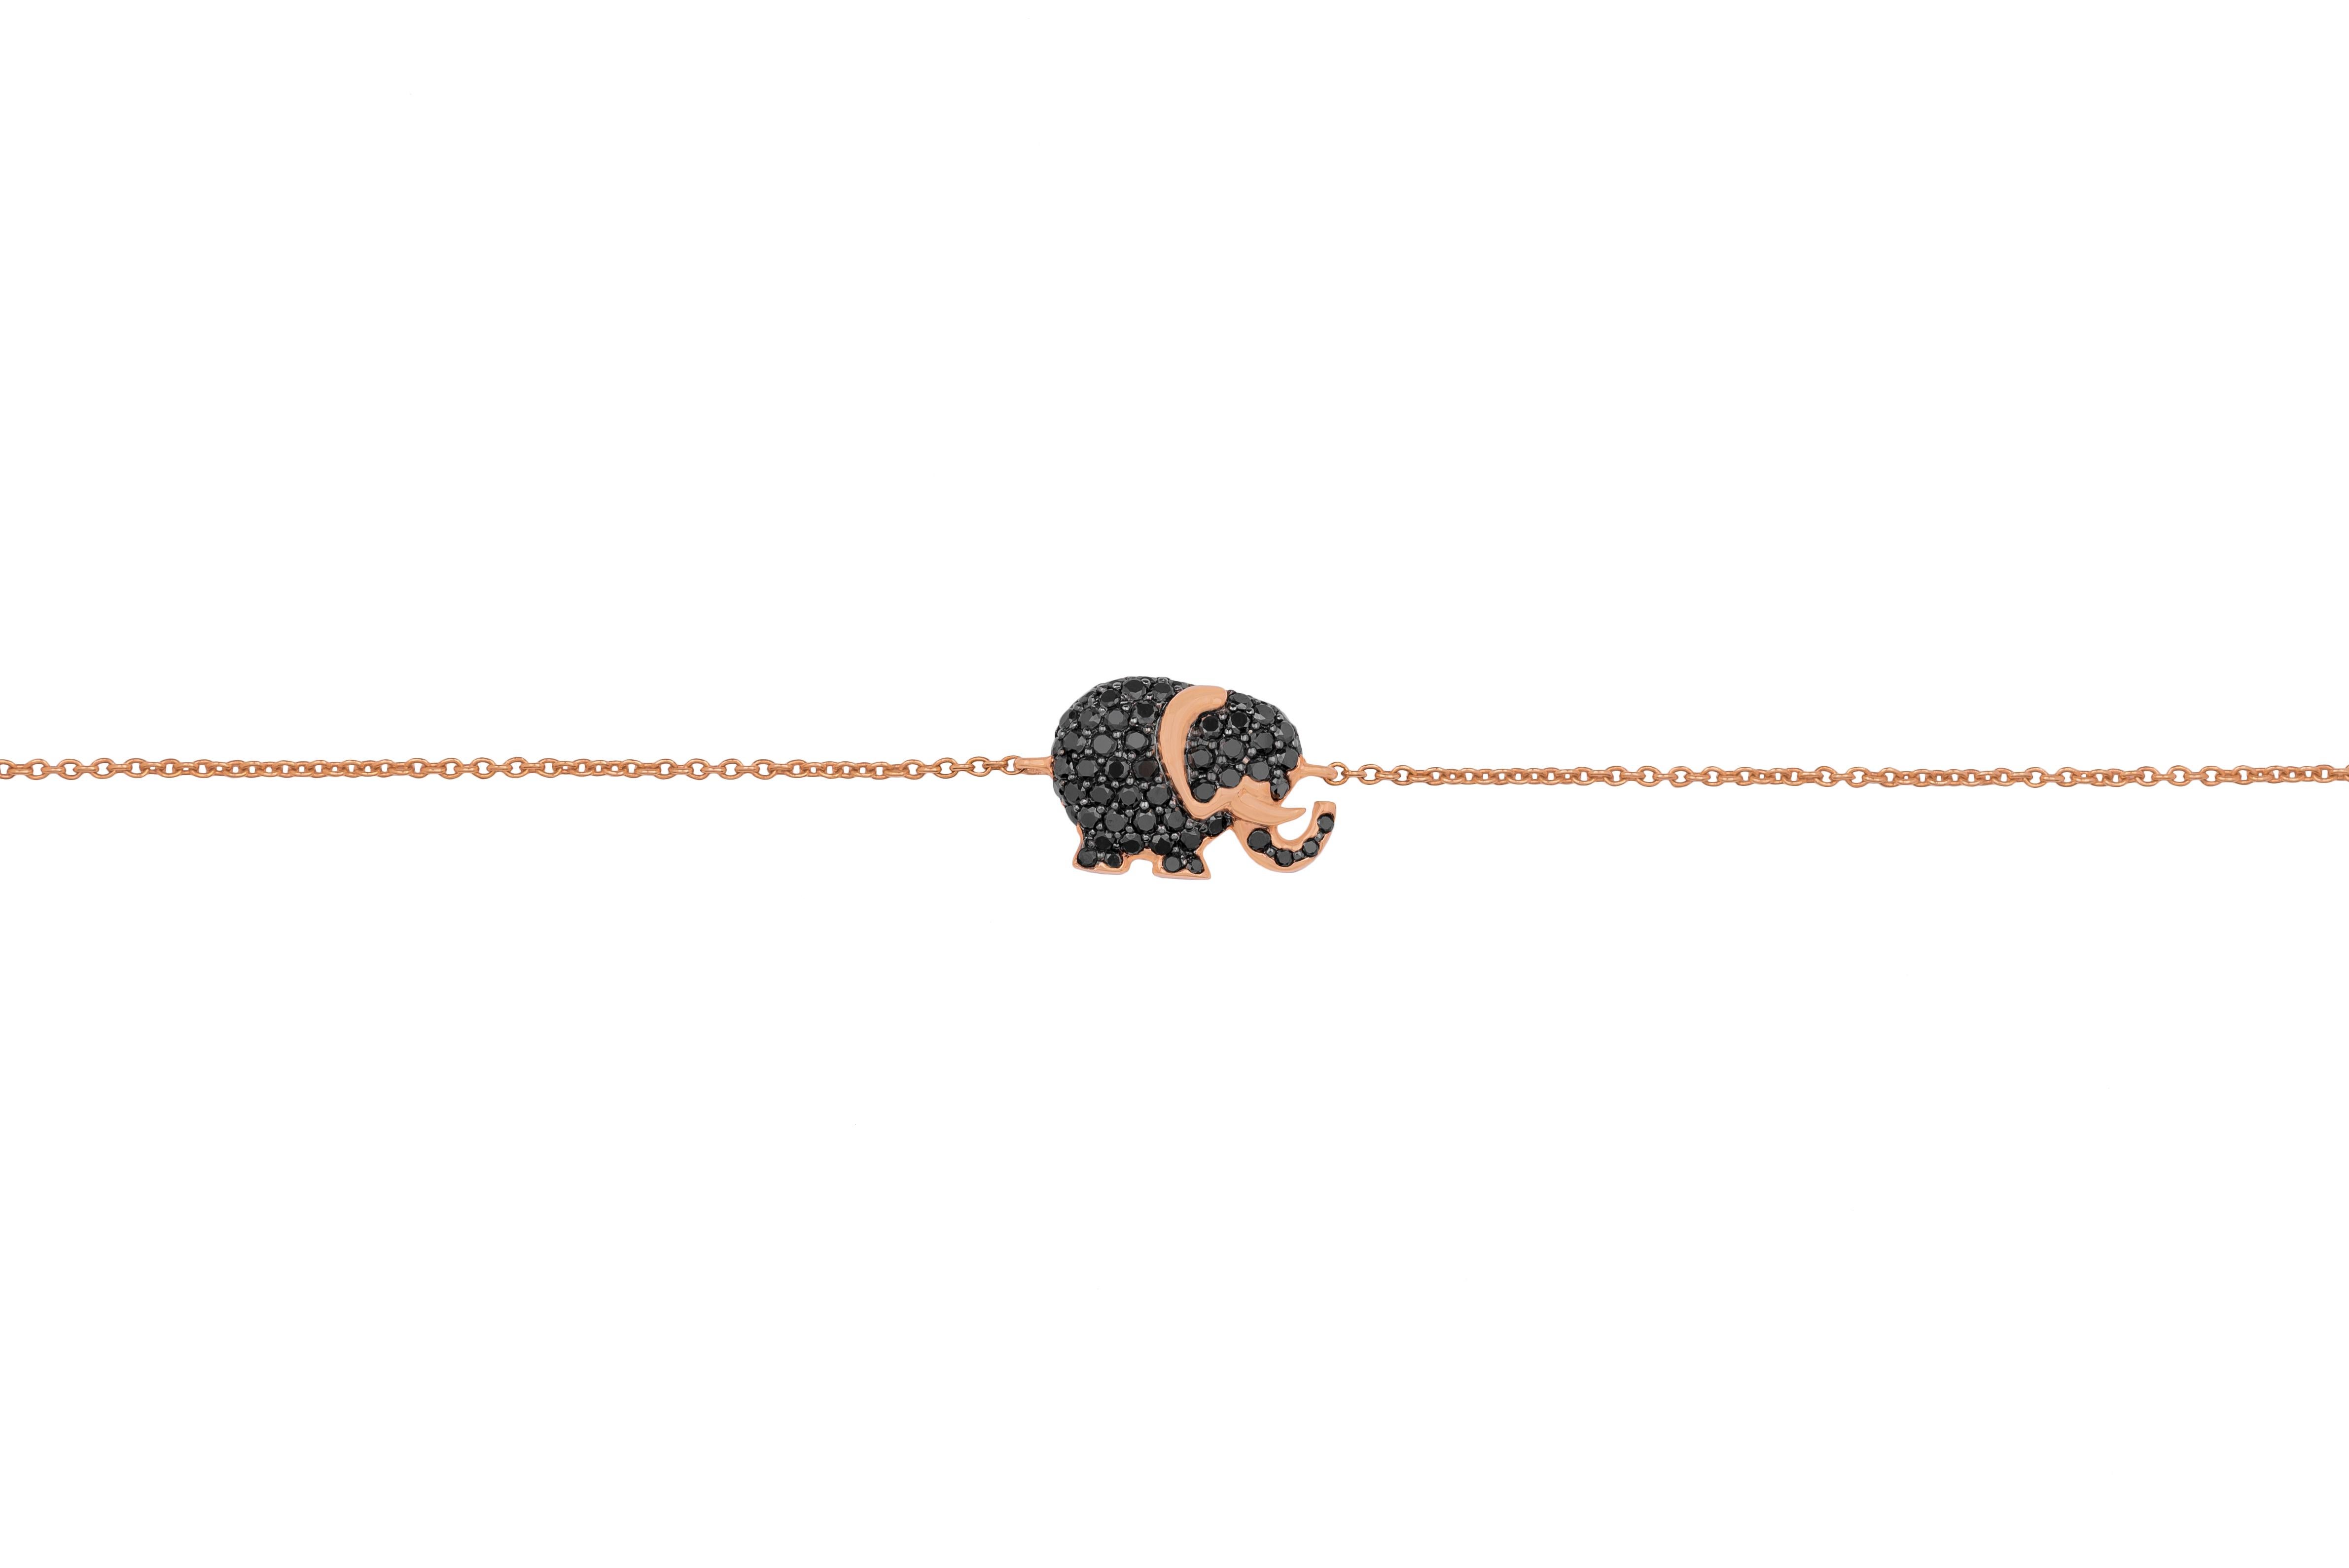 This lovely 18K rose gold and black diamonds bracelet is made in Italy by Fanuele Gioielli.
It features a black brilliant cut diamonds elephant in centre.
Two rings at the end of the chain allow to adjust it to different lengths.

Black diamonds